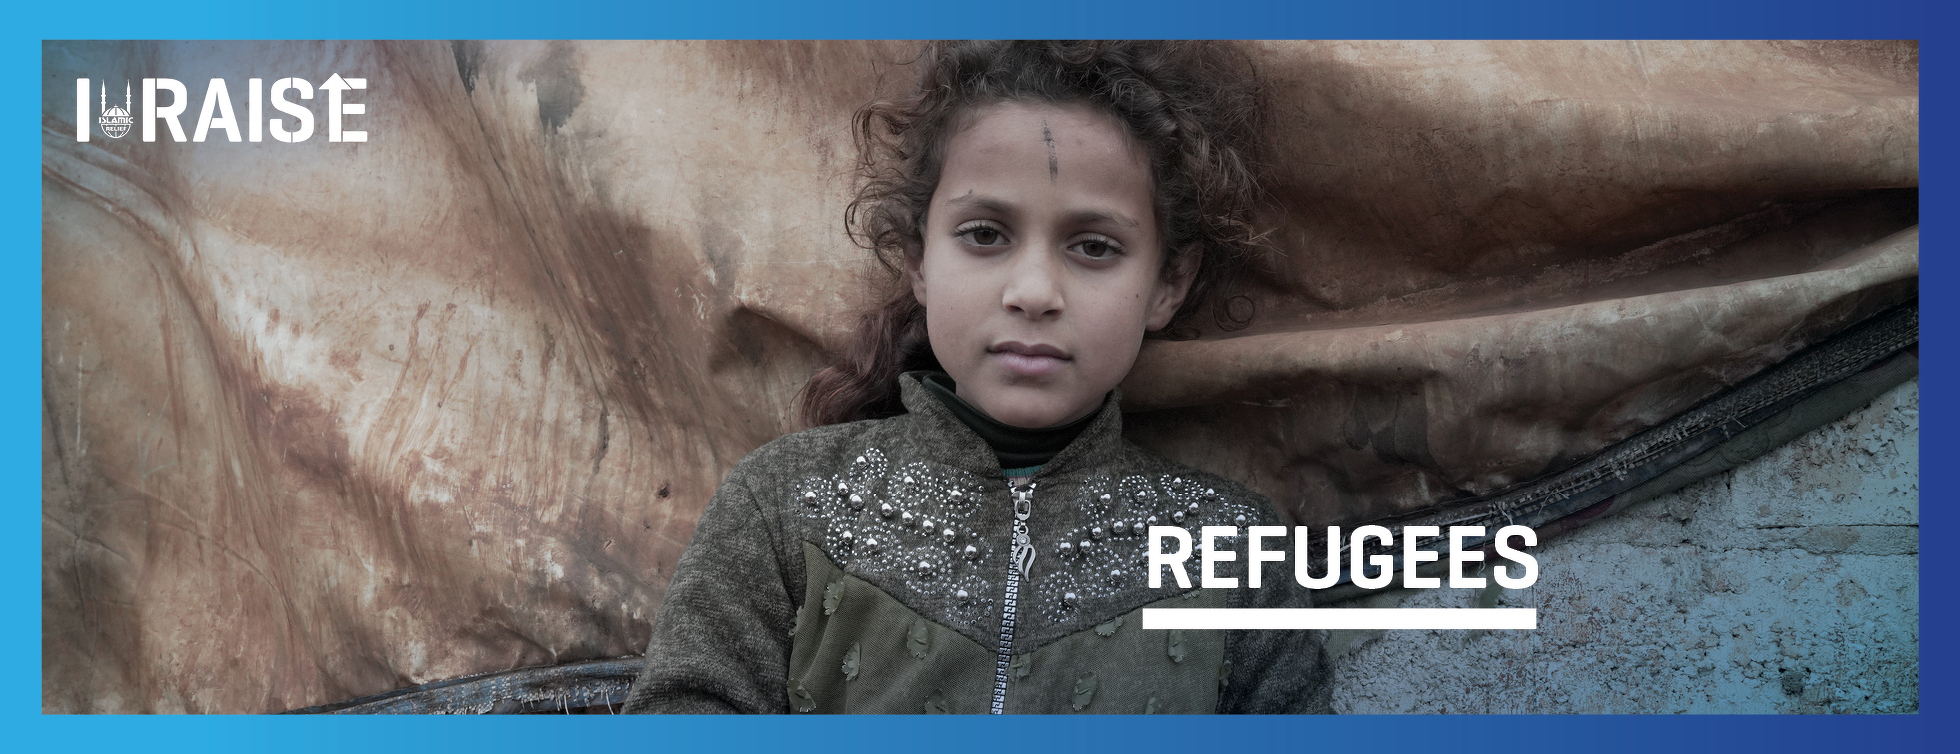 IRaise For Refugees 